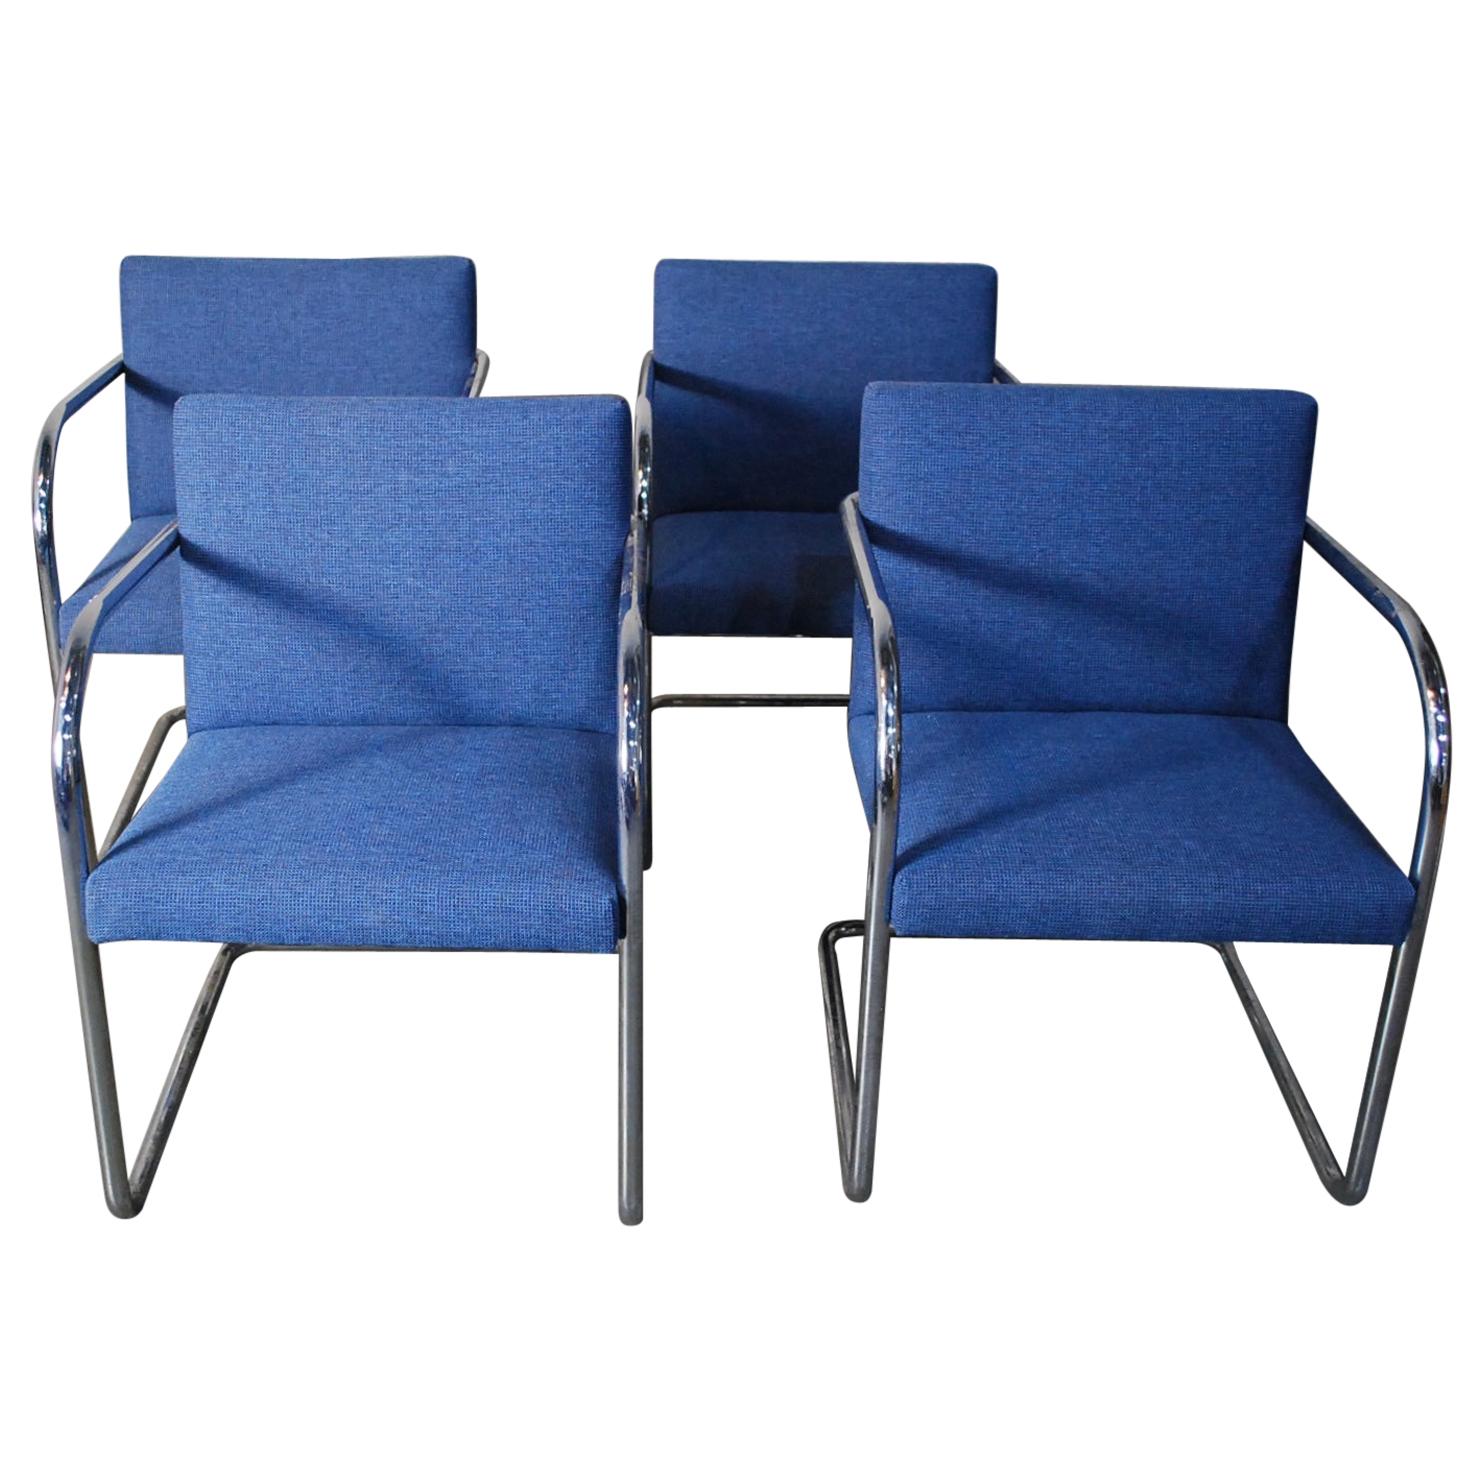 1970 Set of Two Cantilever Chrome Brno Chairs by Thonet